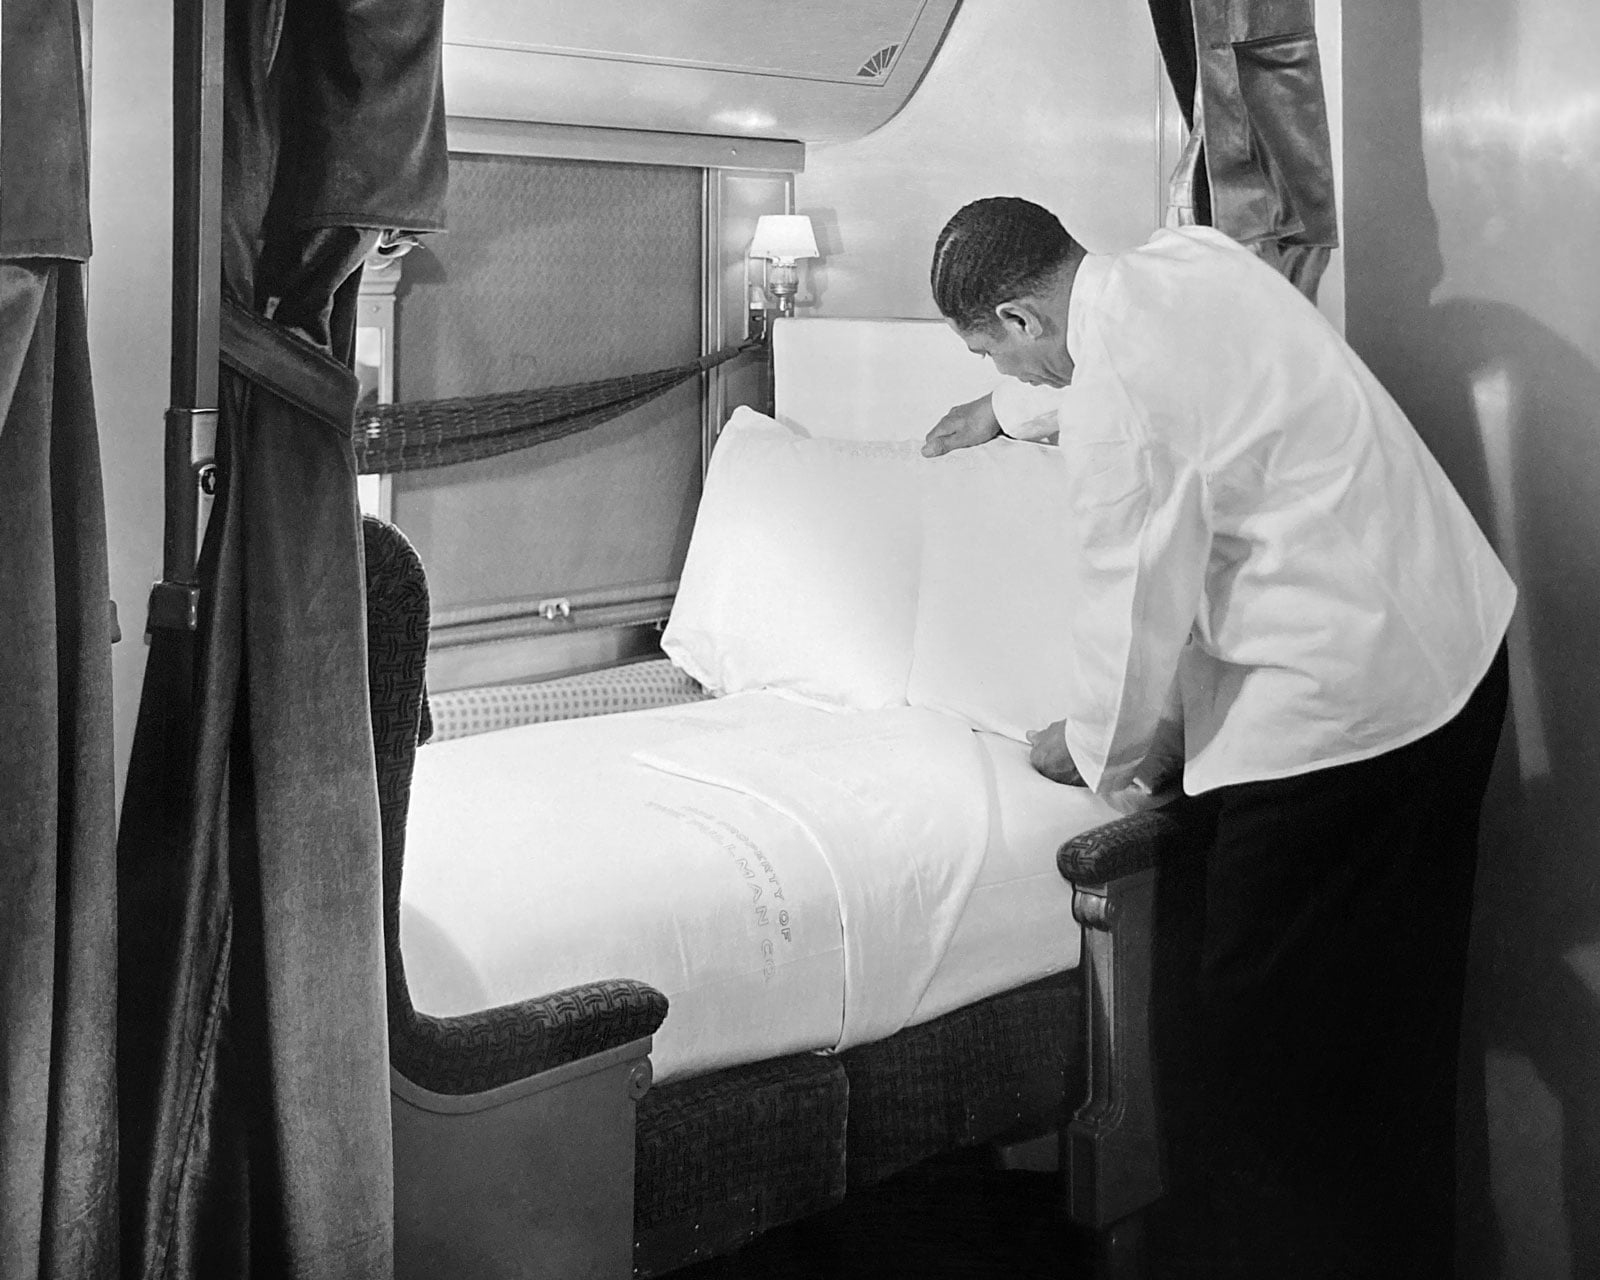 Porter adjusting pillow on bed in train car